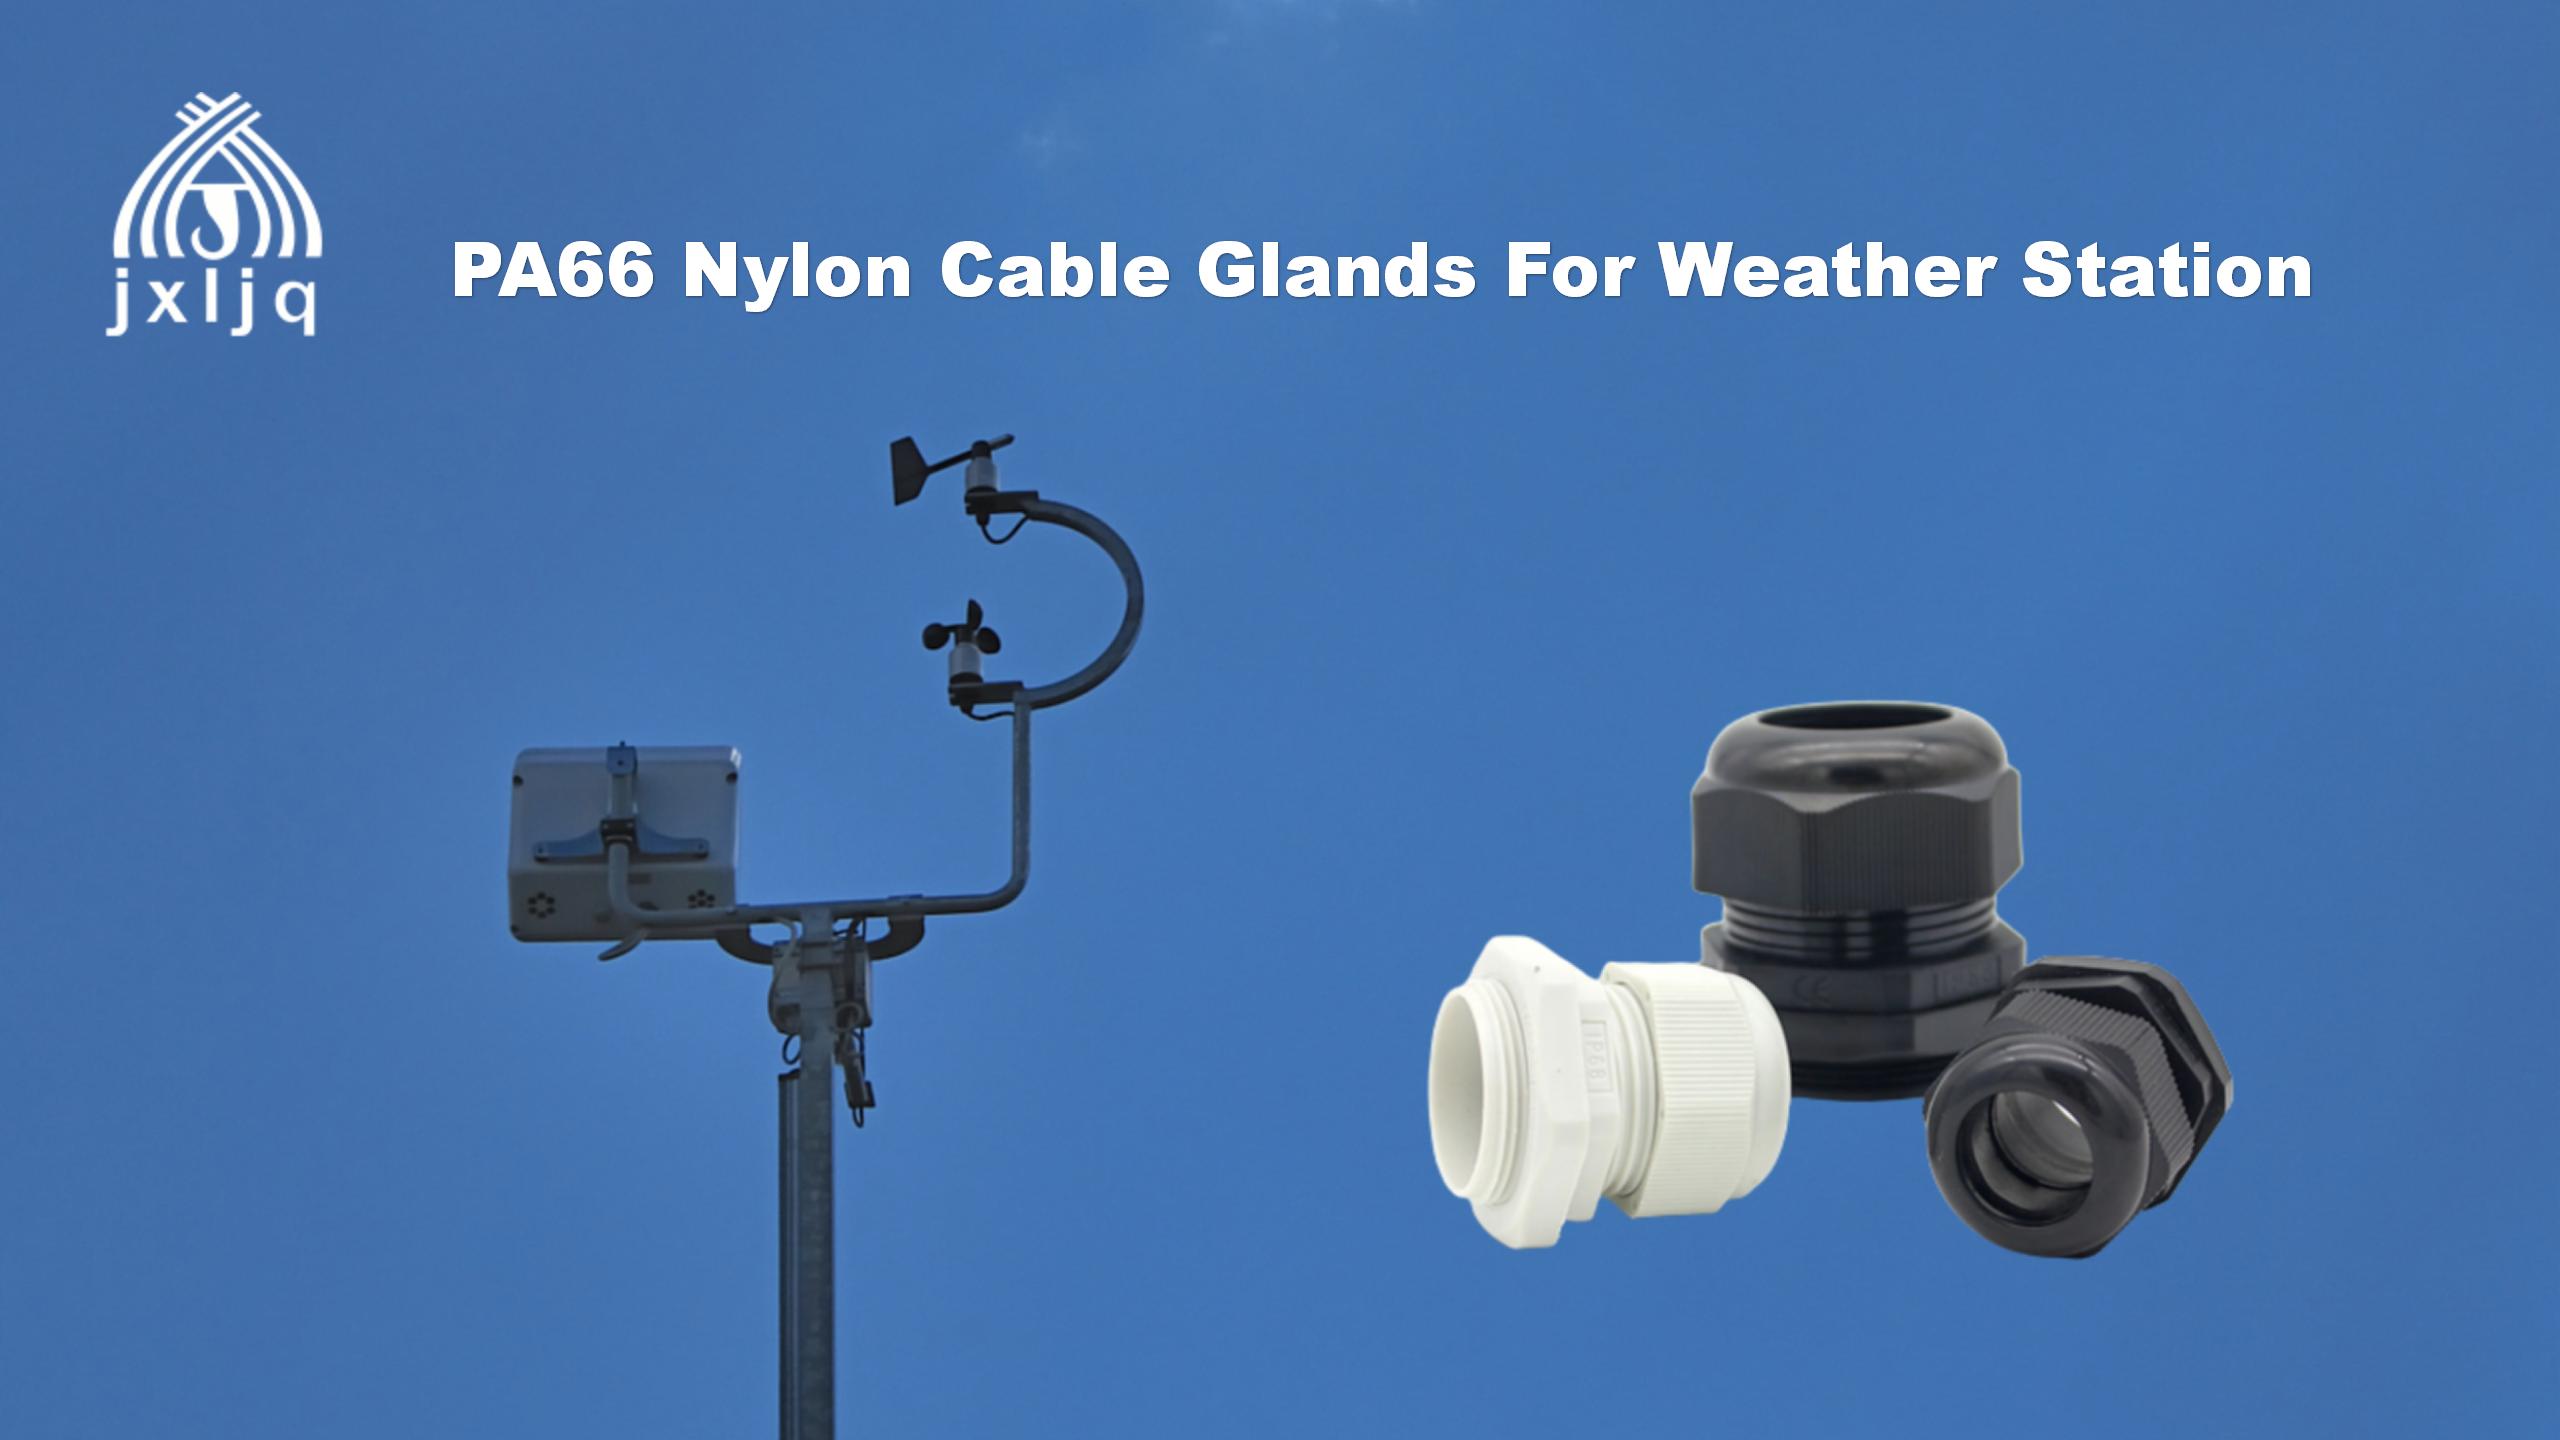 Application of PA66 Nylon Cable Glands for weather station